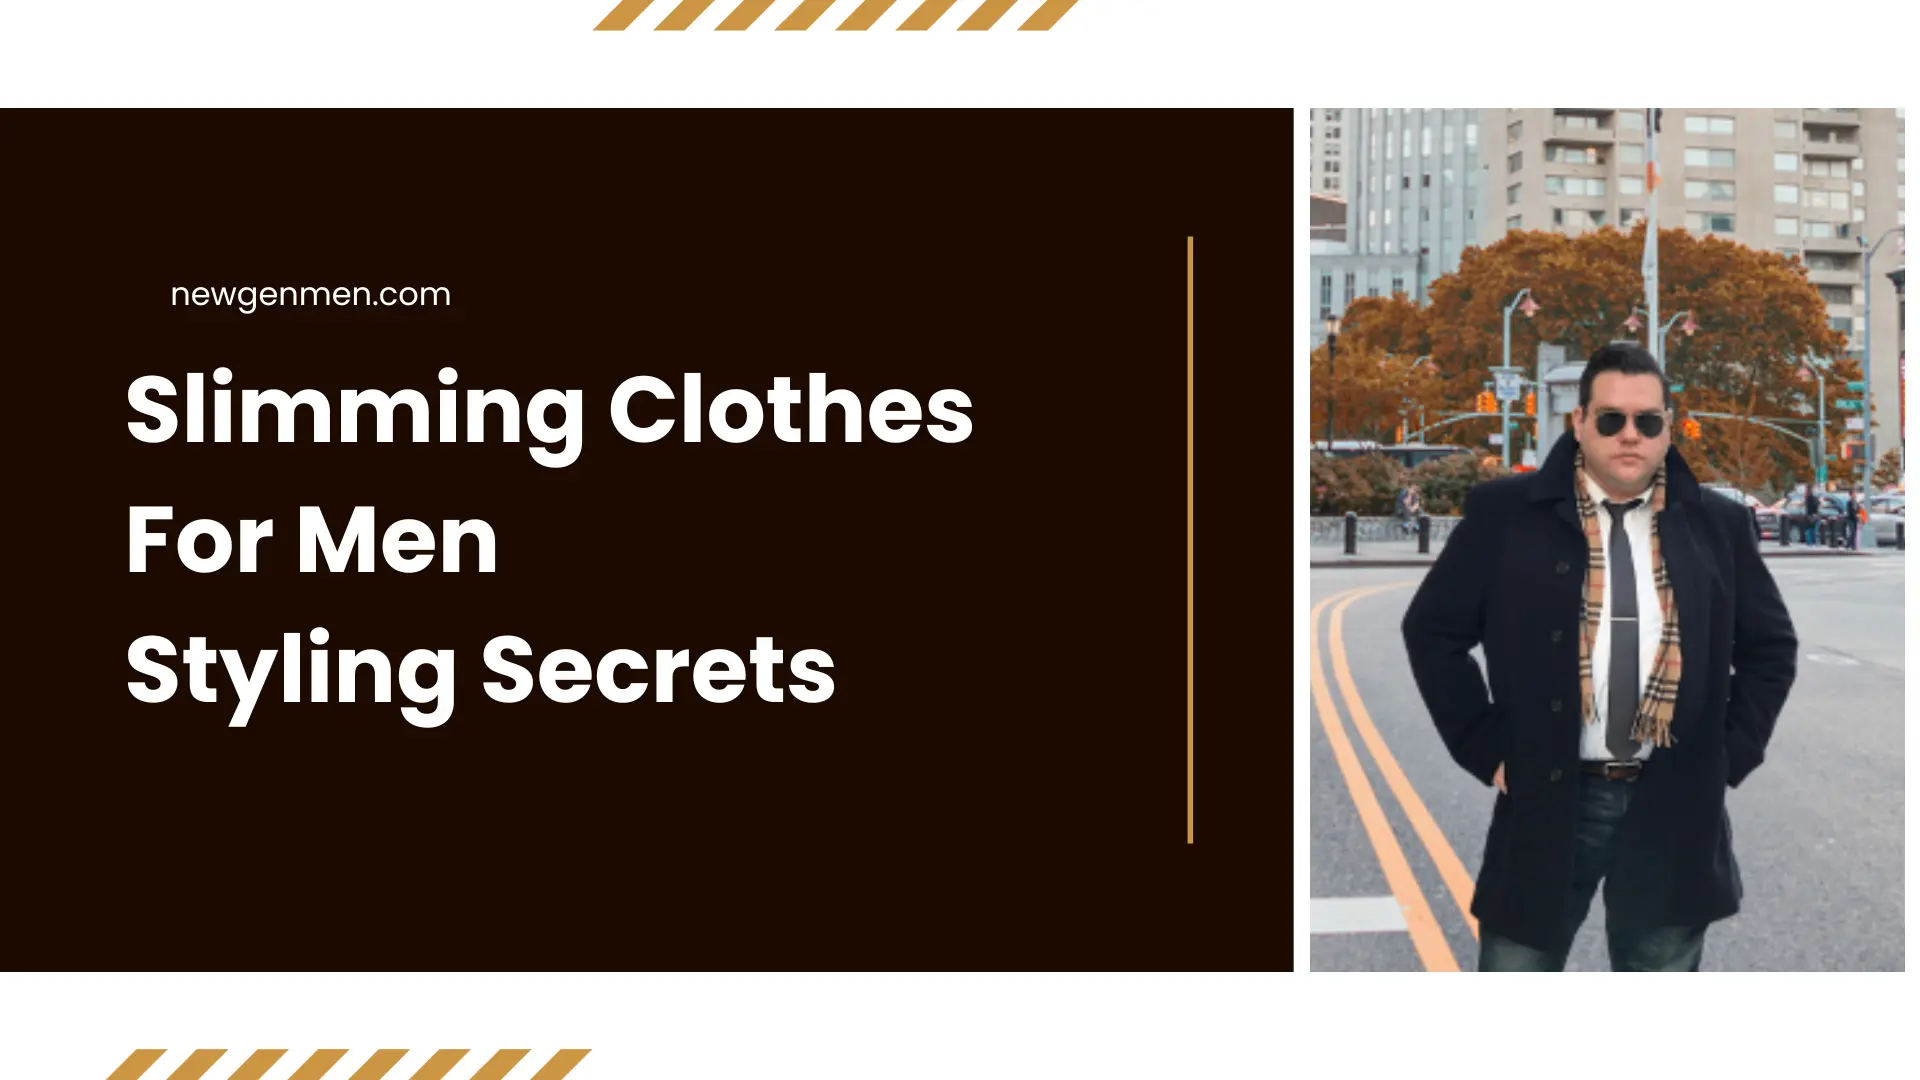 Slimming Clothes For Men Styling Secrets